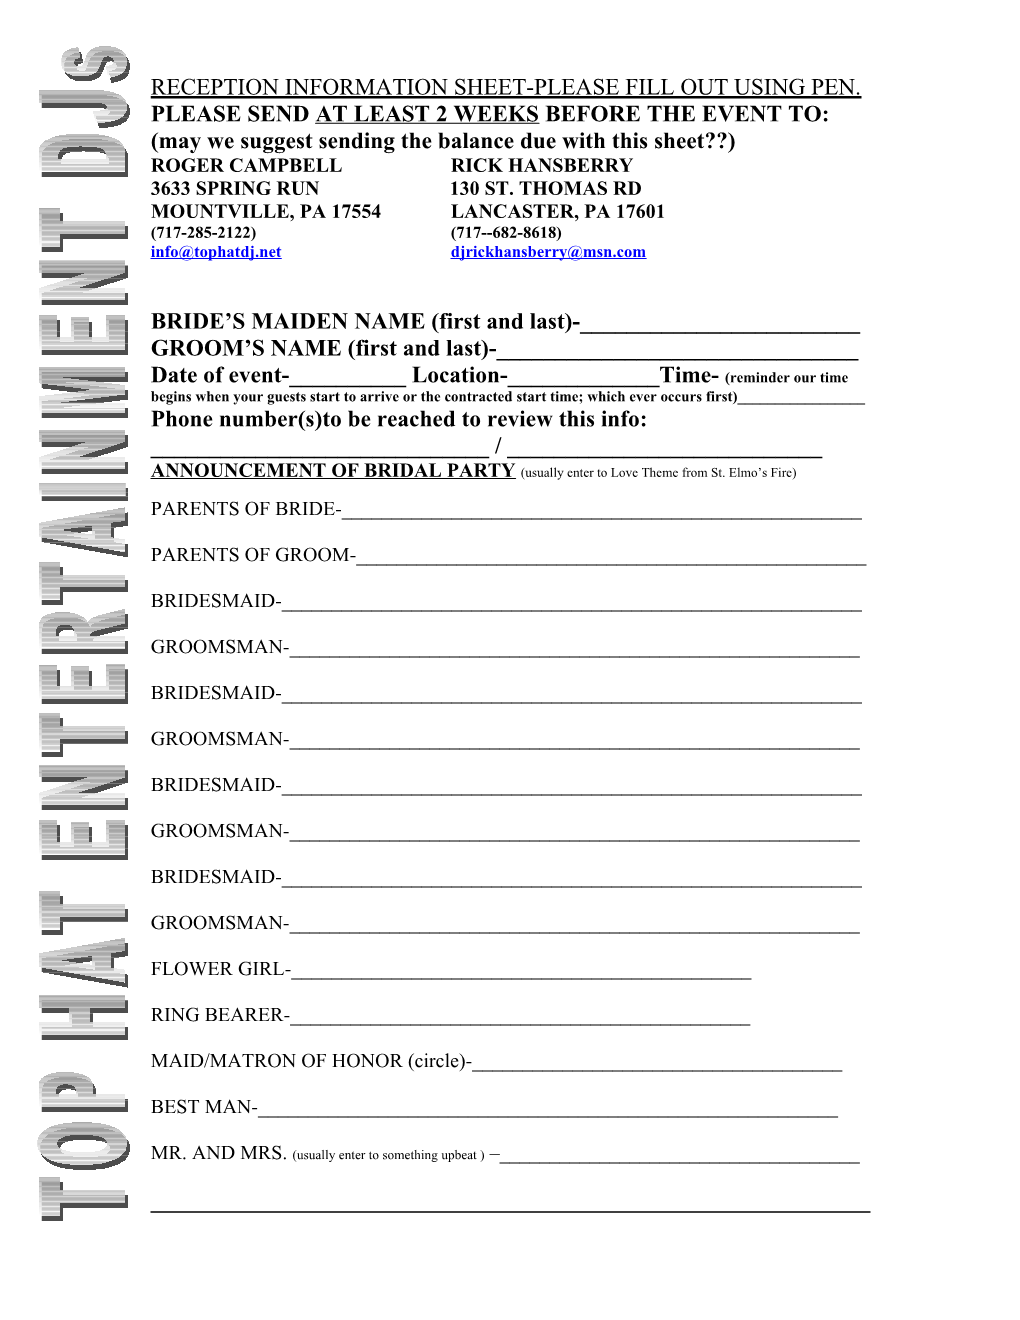 Reception Information Sheet-Please Fill out Using Pen